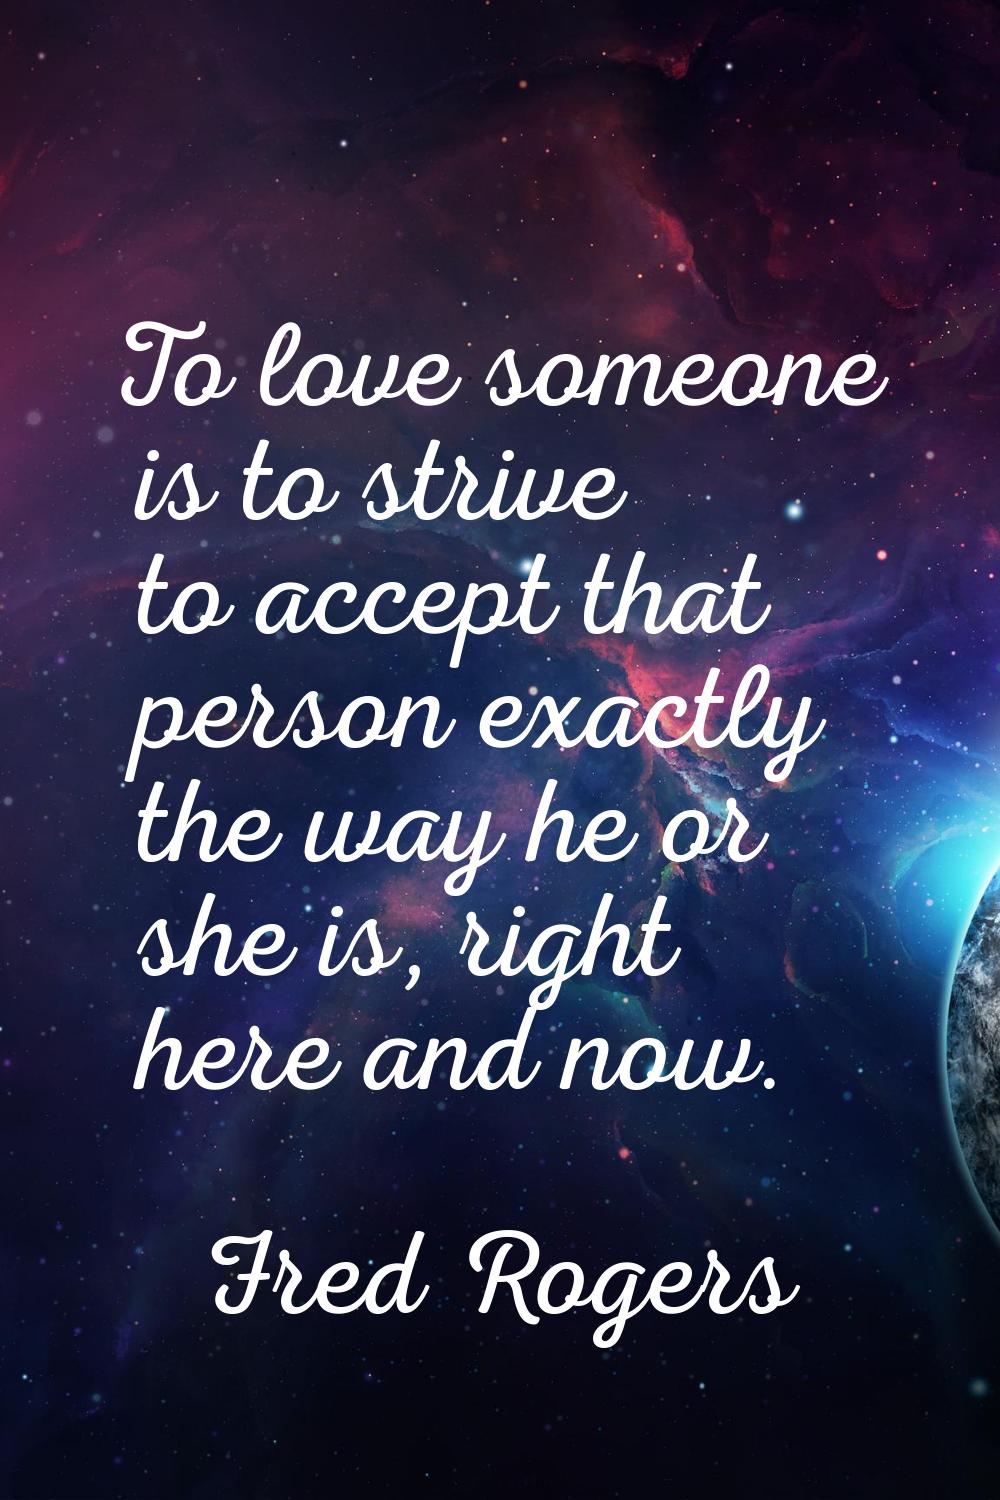 To love someone is to strive to accept that person exactly the way he or she is, right here and now